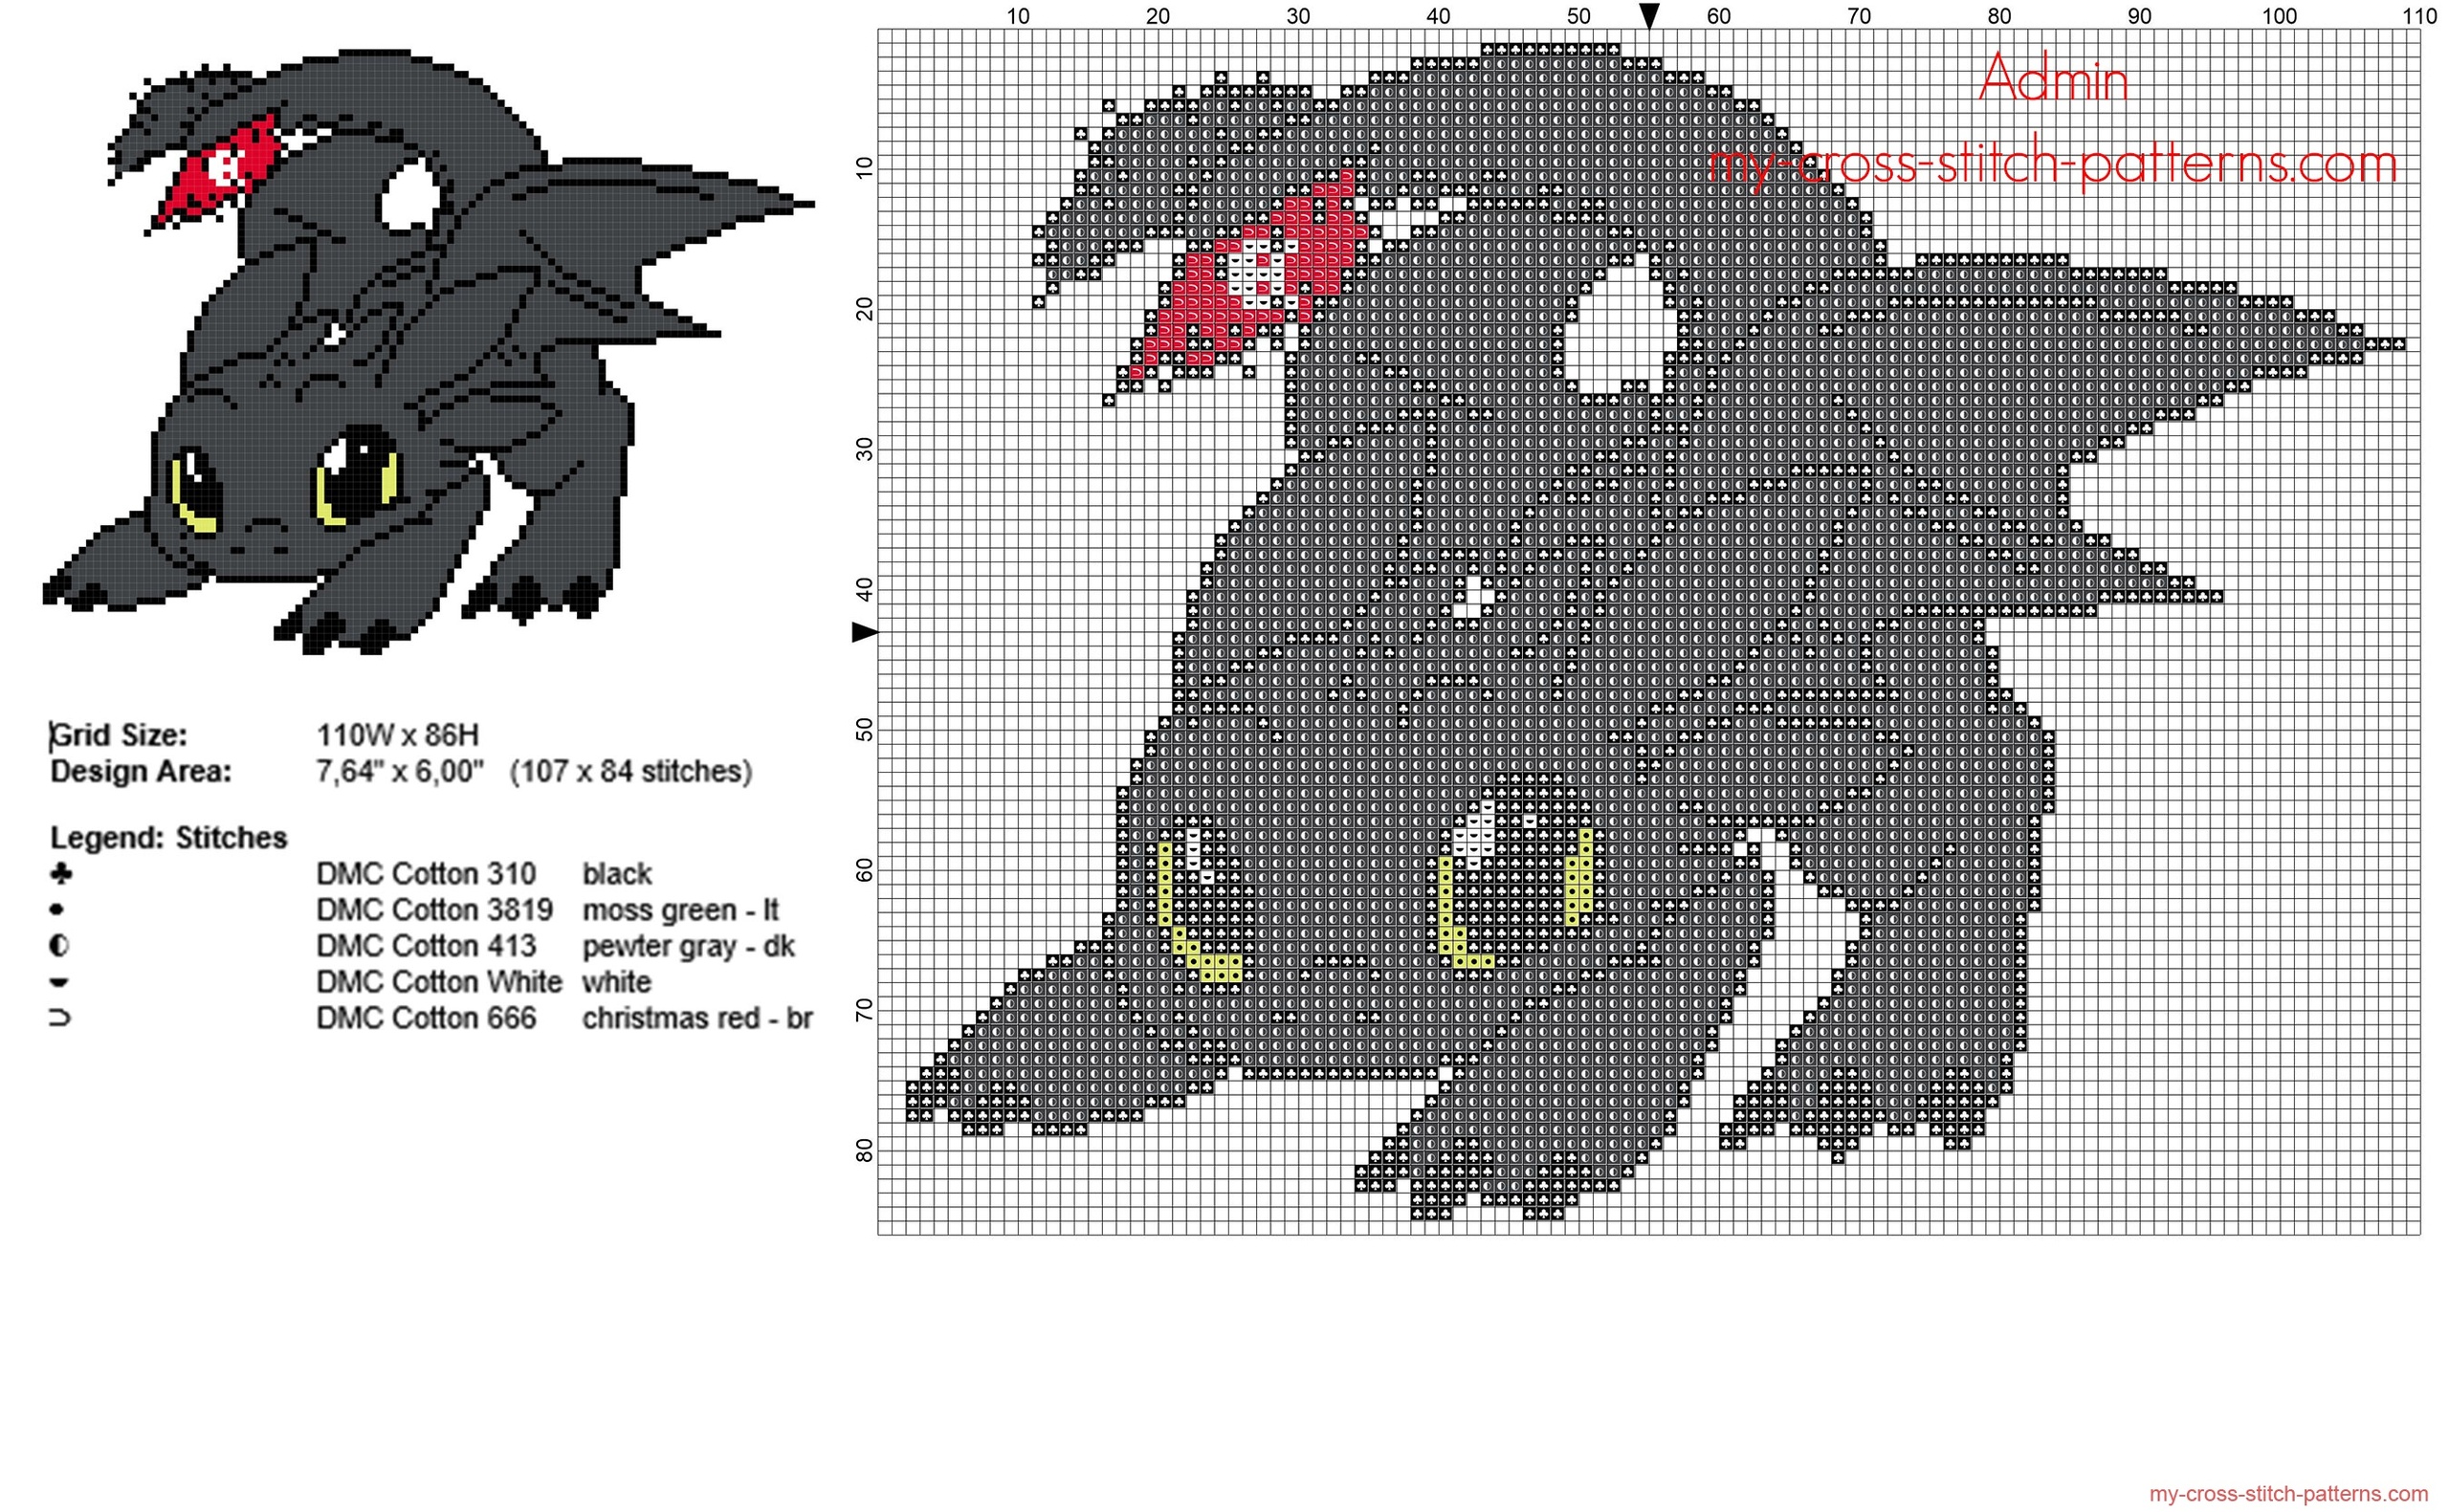 toothless_dragon_trainer_how_to_train_your_dragon_free_cross_stitch_pattern